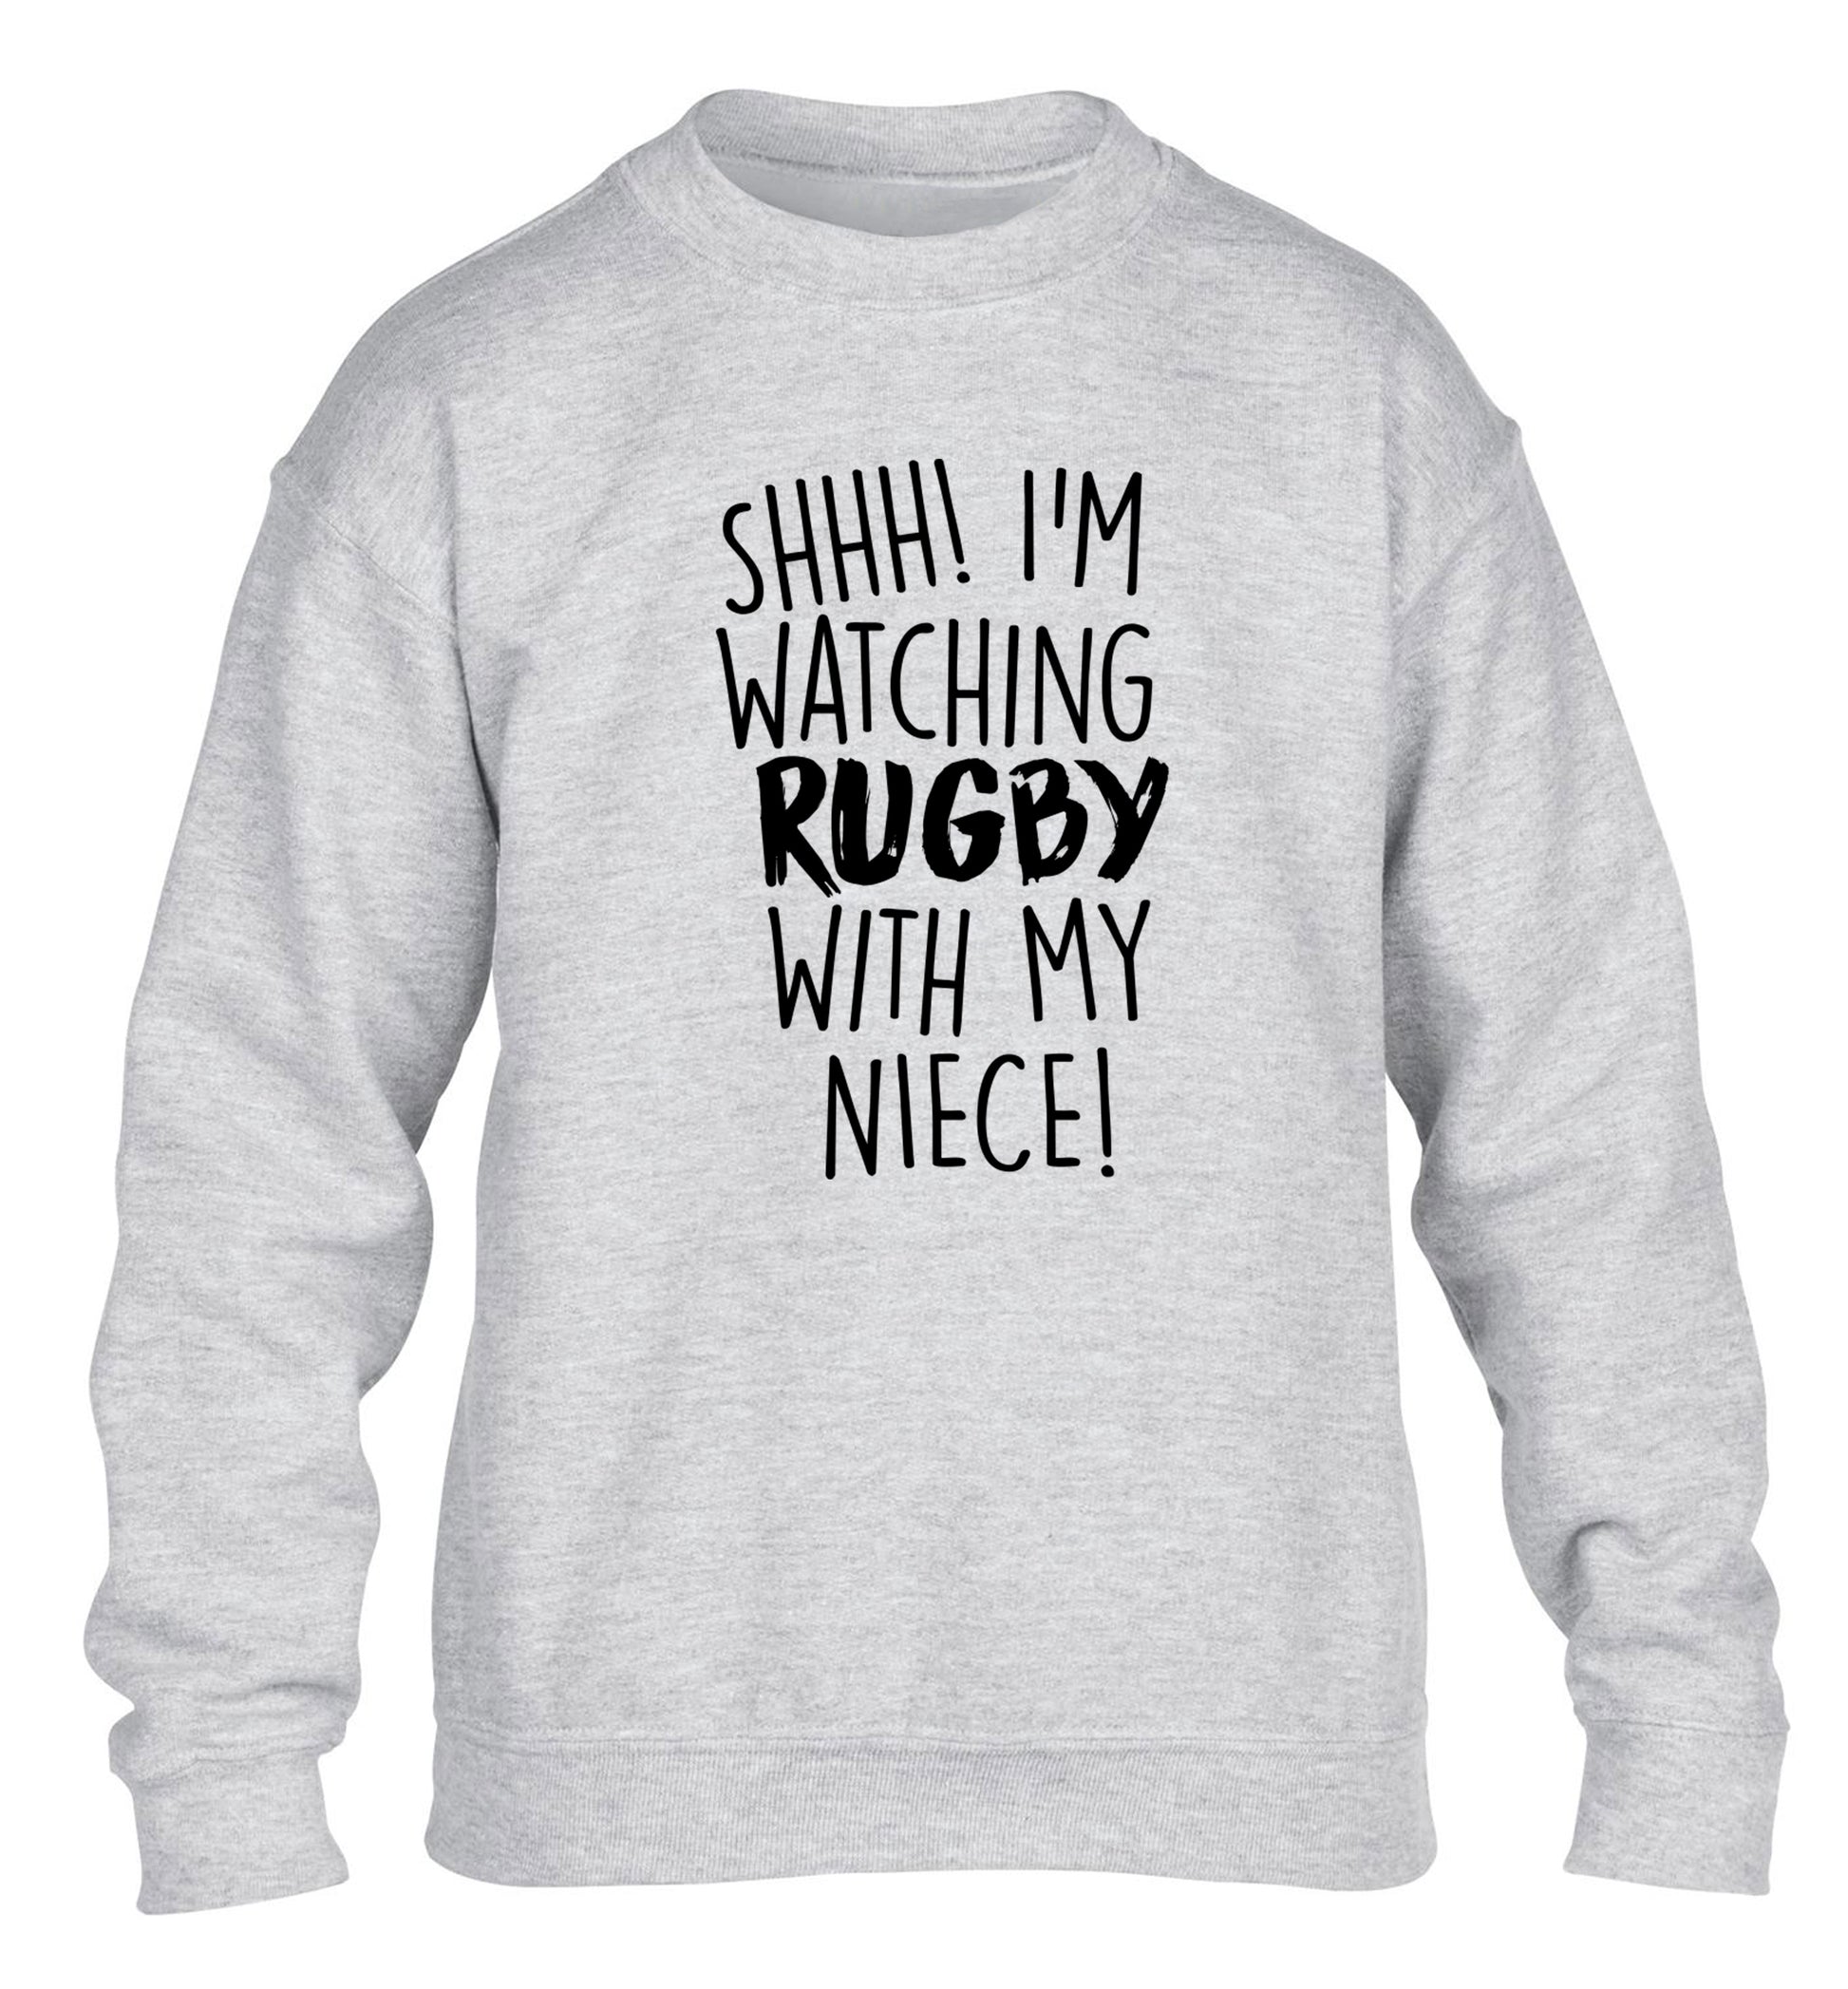 Shh.. I'm watching rugby with my niece children's grey sweater 12-13 Years